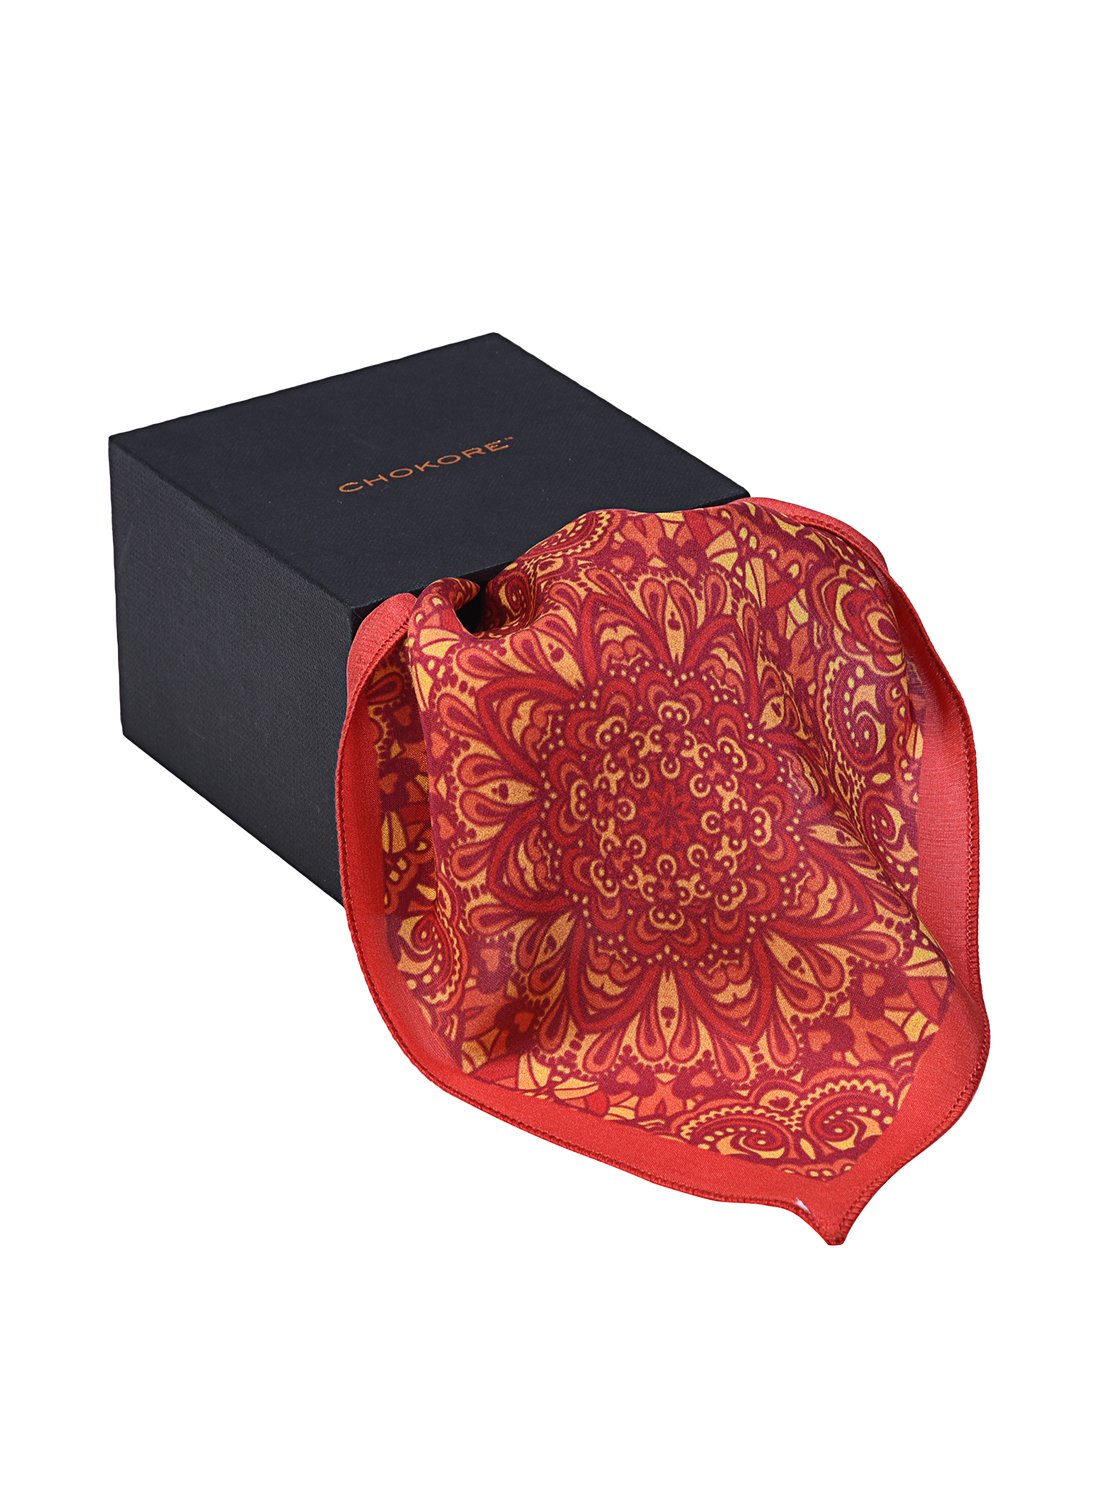 Chokore Red & Orange Silk Pocket Square from Indian at Heart collection